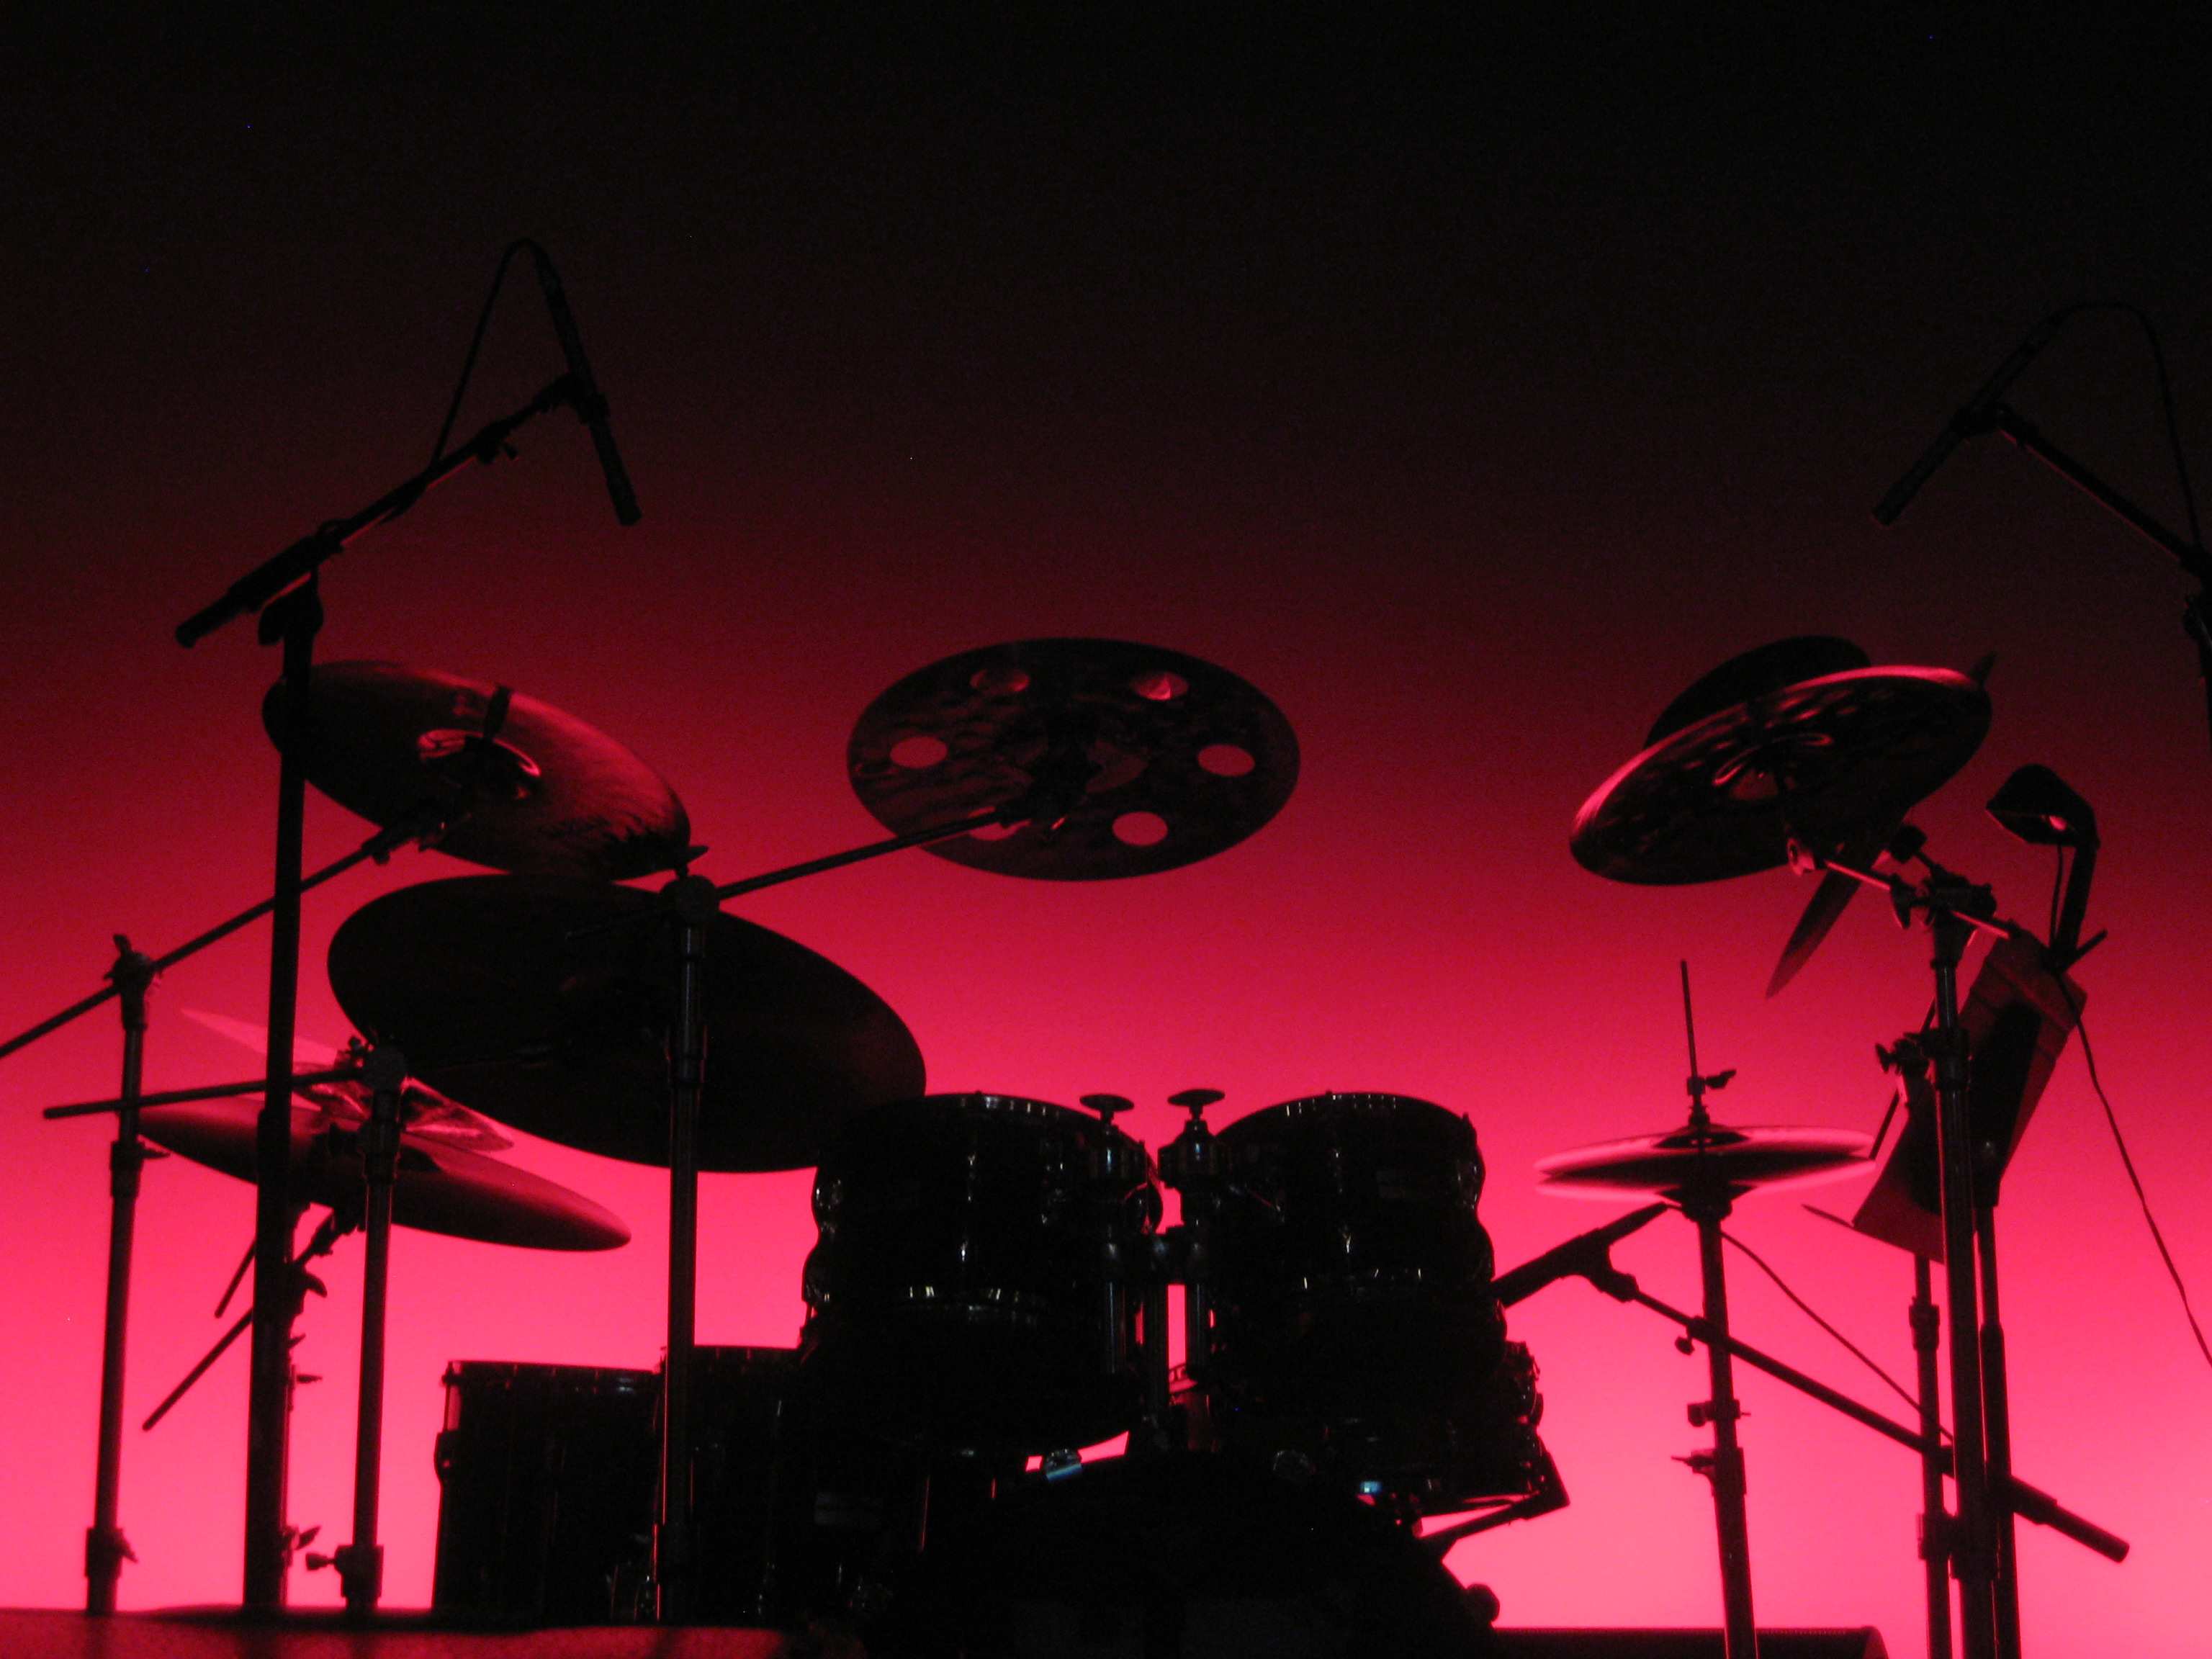 Cool Drum Set Background I Think This Is A Very